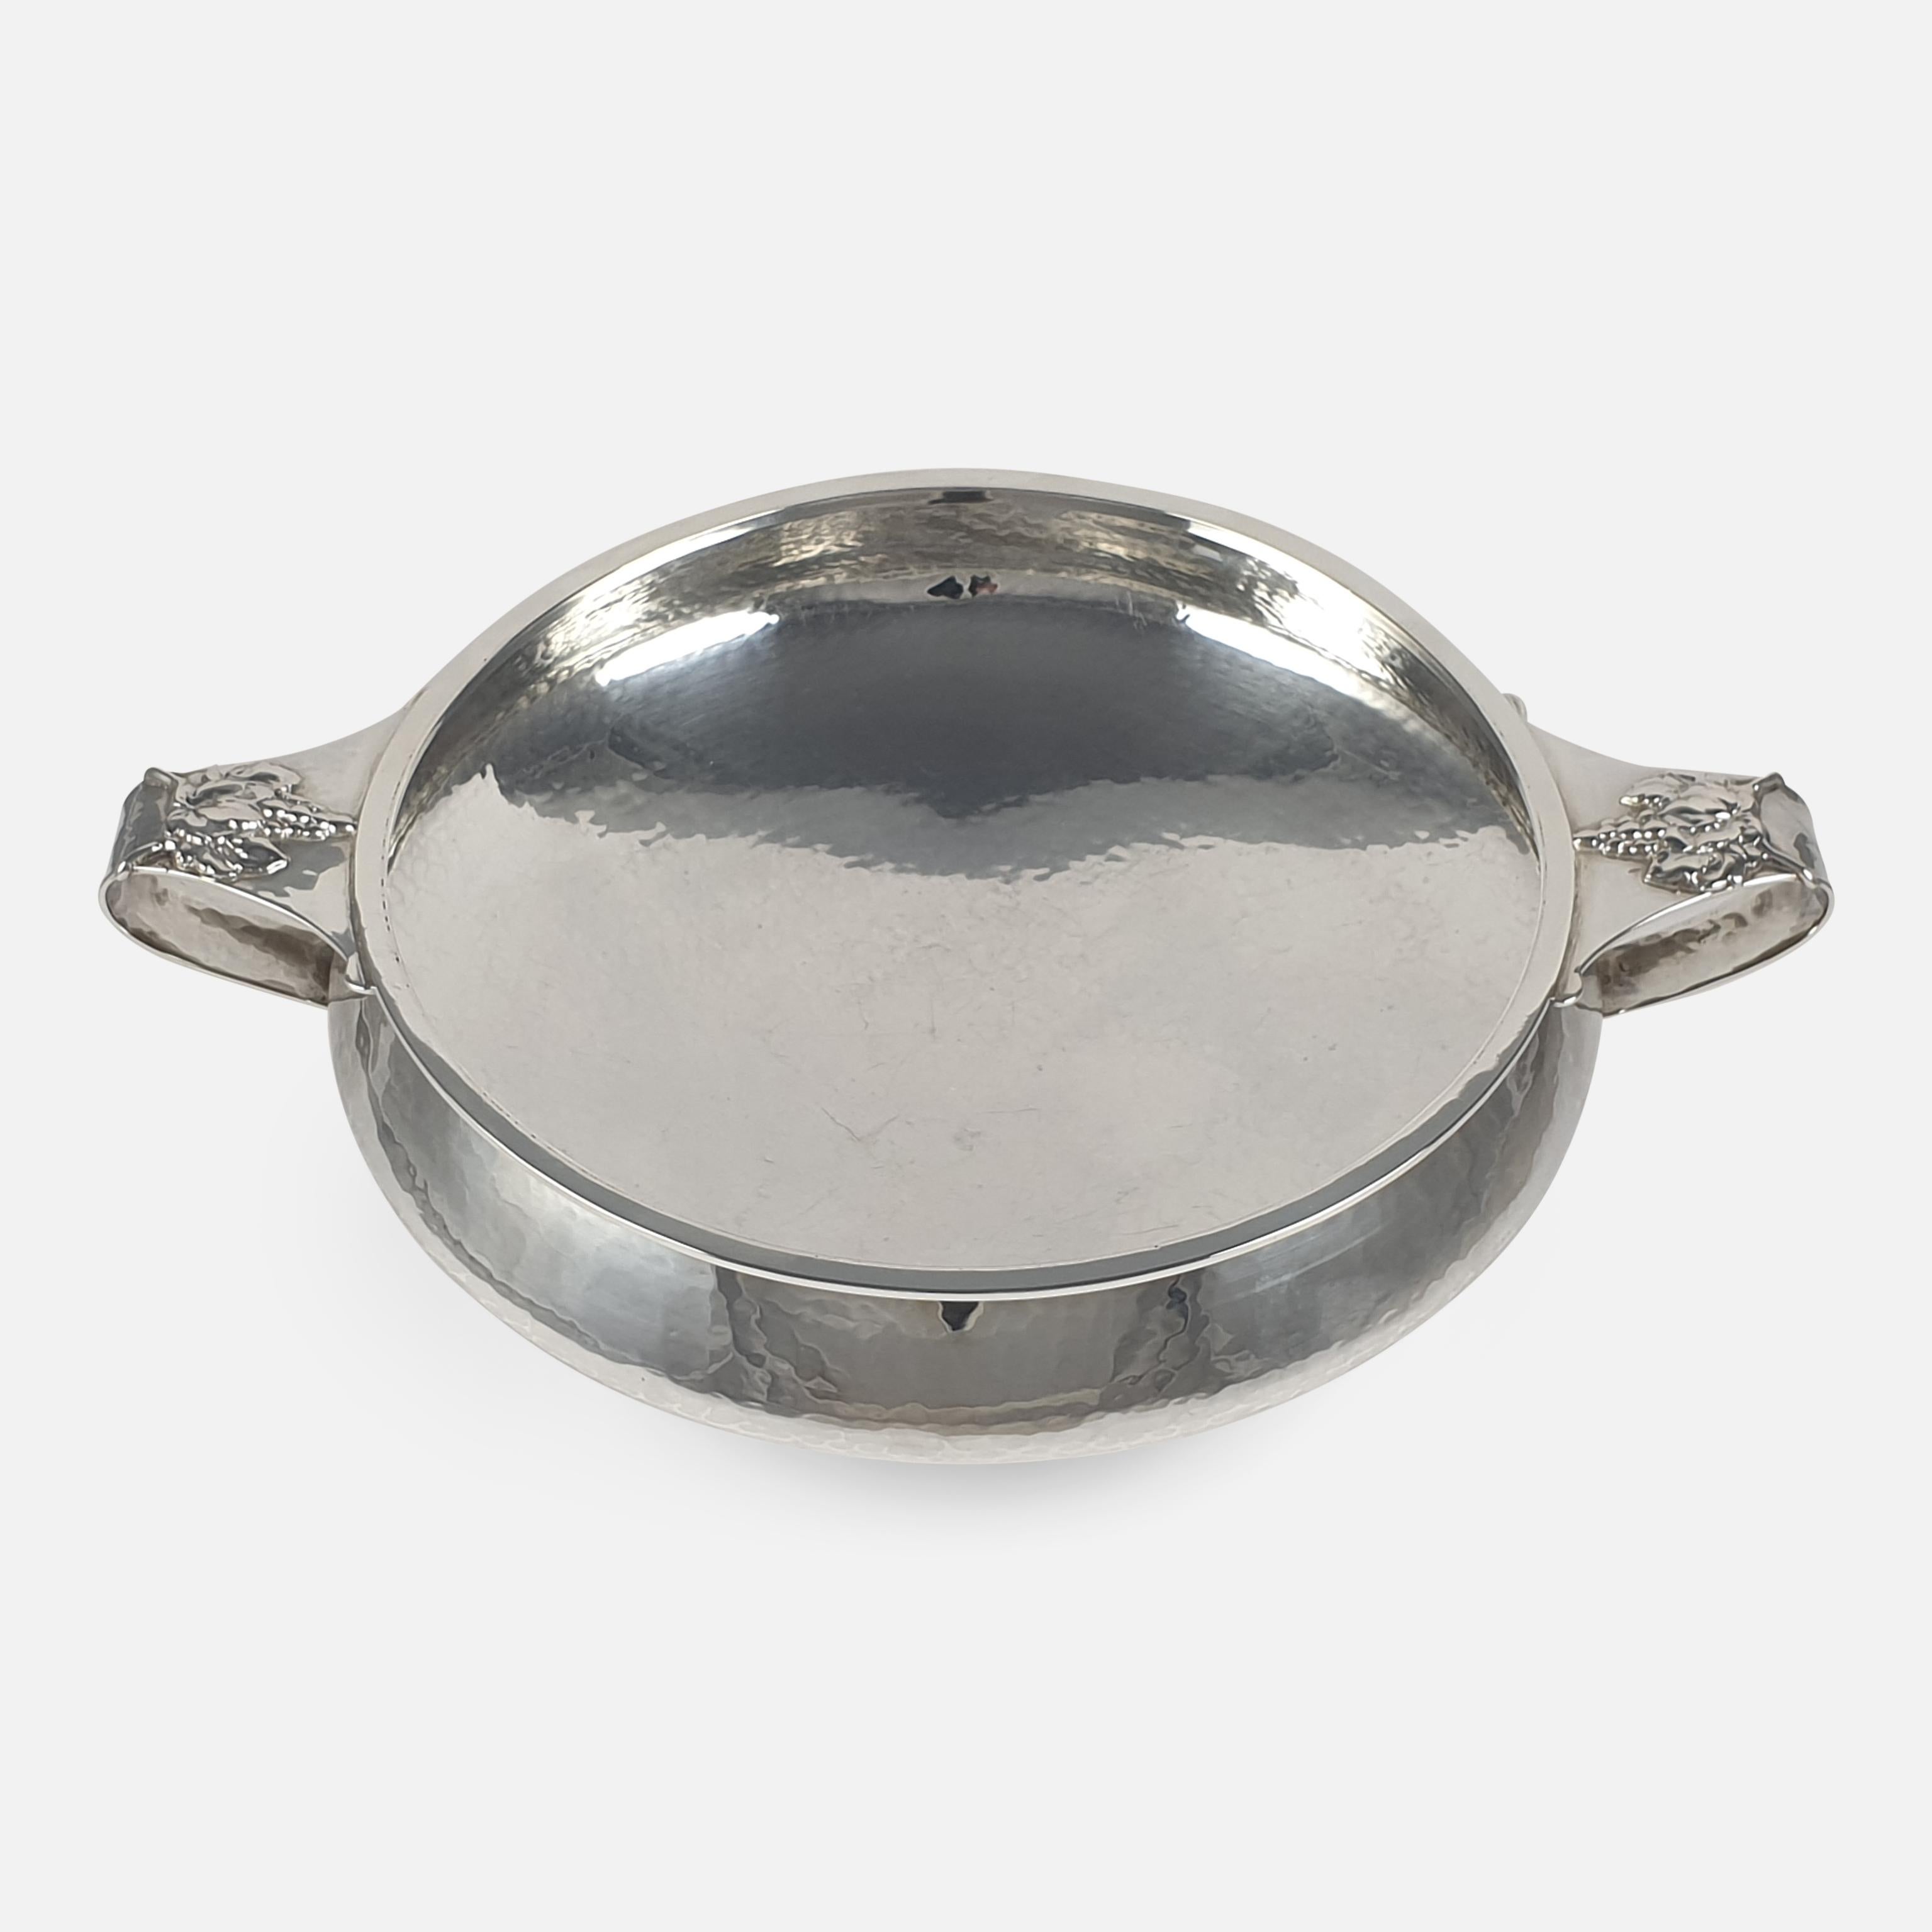 British Arts & Crafts Sterling Silver Twin-Handled Hammered Bowl, A. E. Jones, 1928